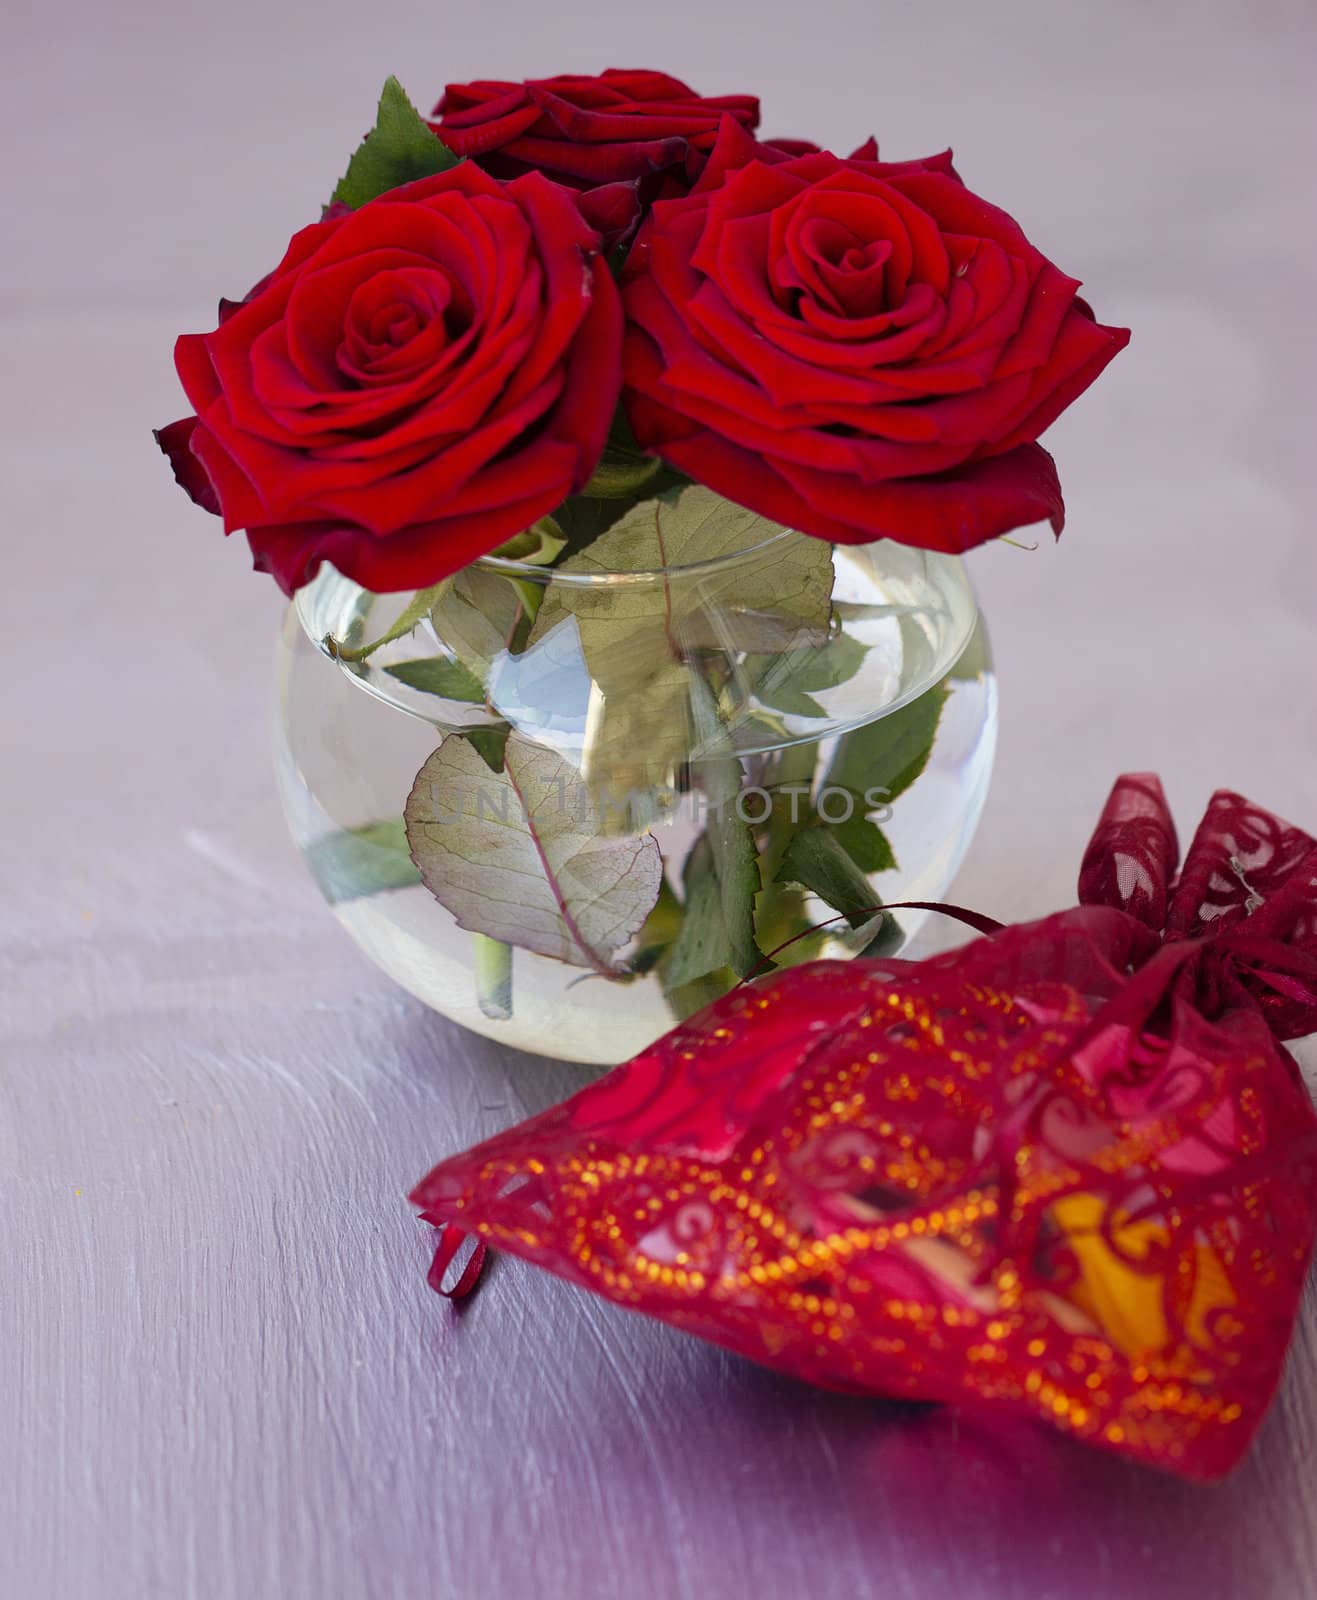 vase with red roses on the table by victosha